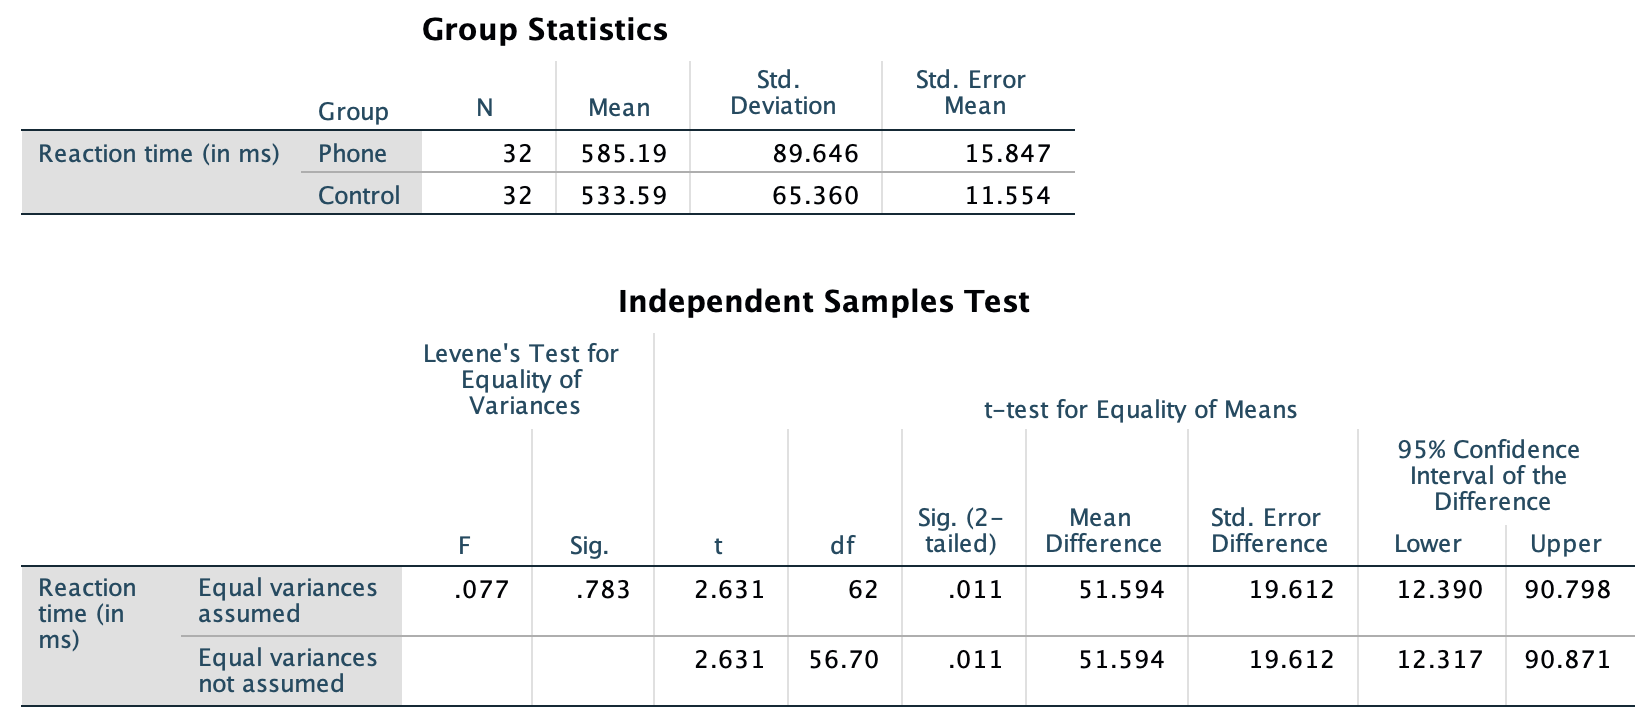 The SPSS output for the phone-reaction data